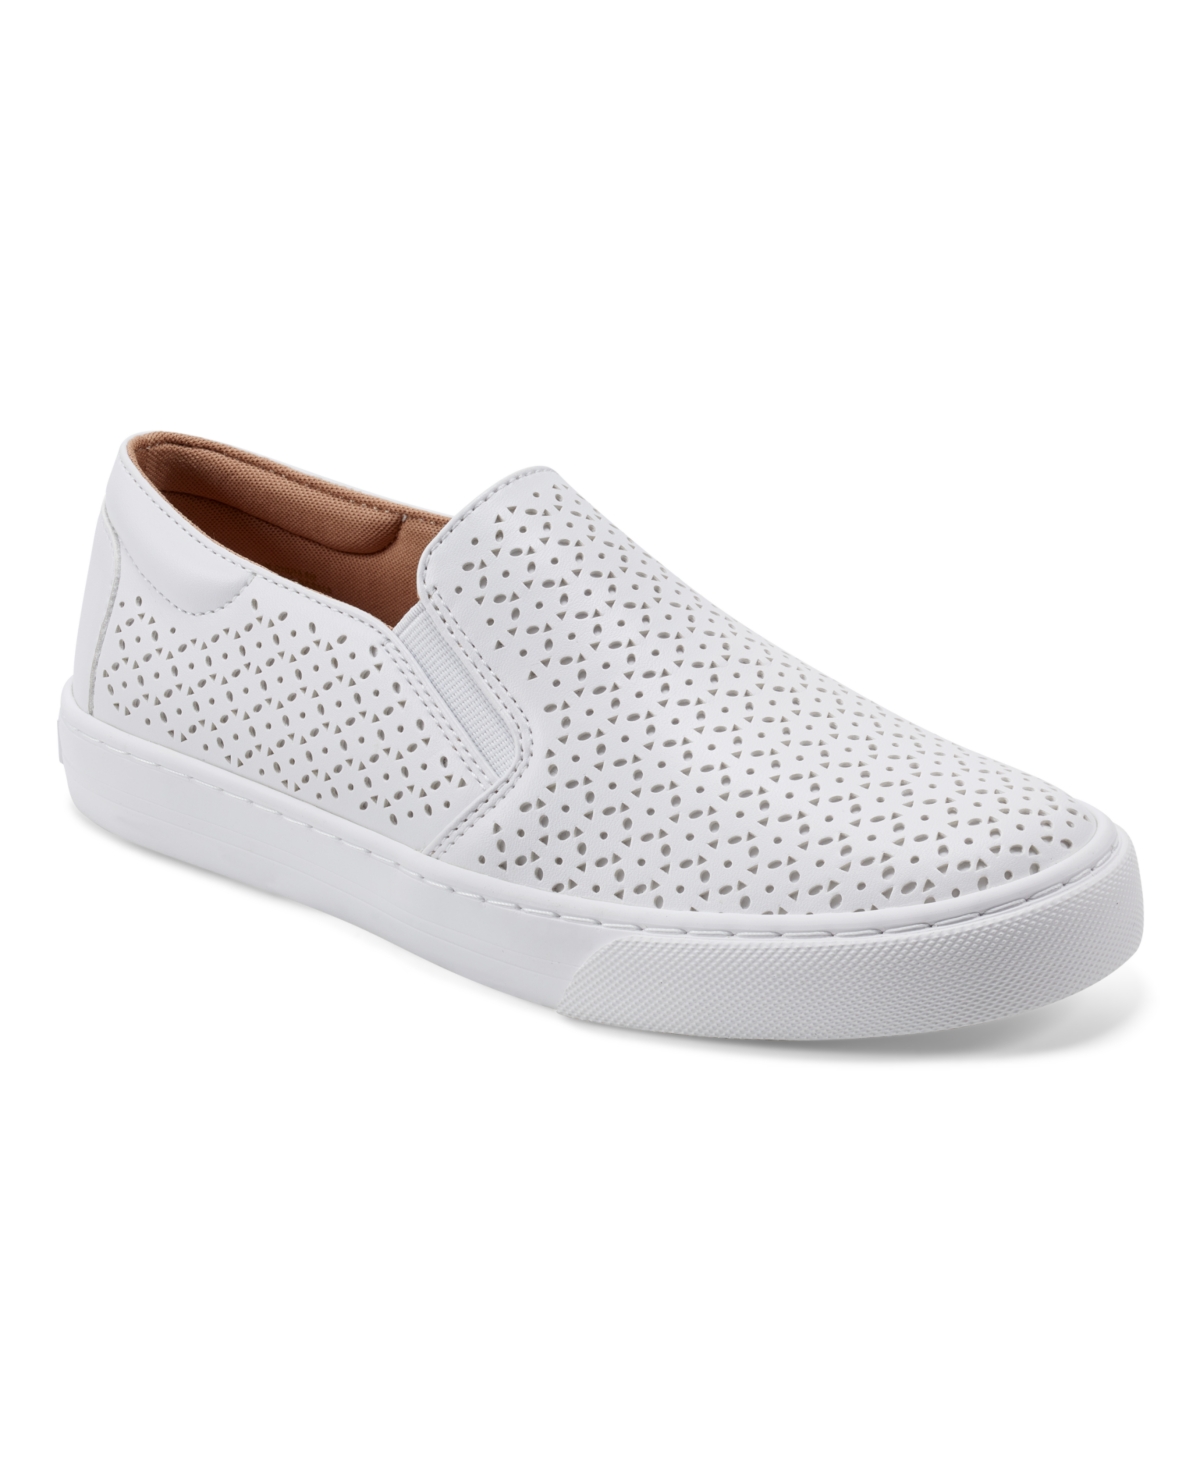 Women's Luciana Round Toe Casual Slip-On Shoes - White